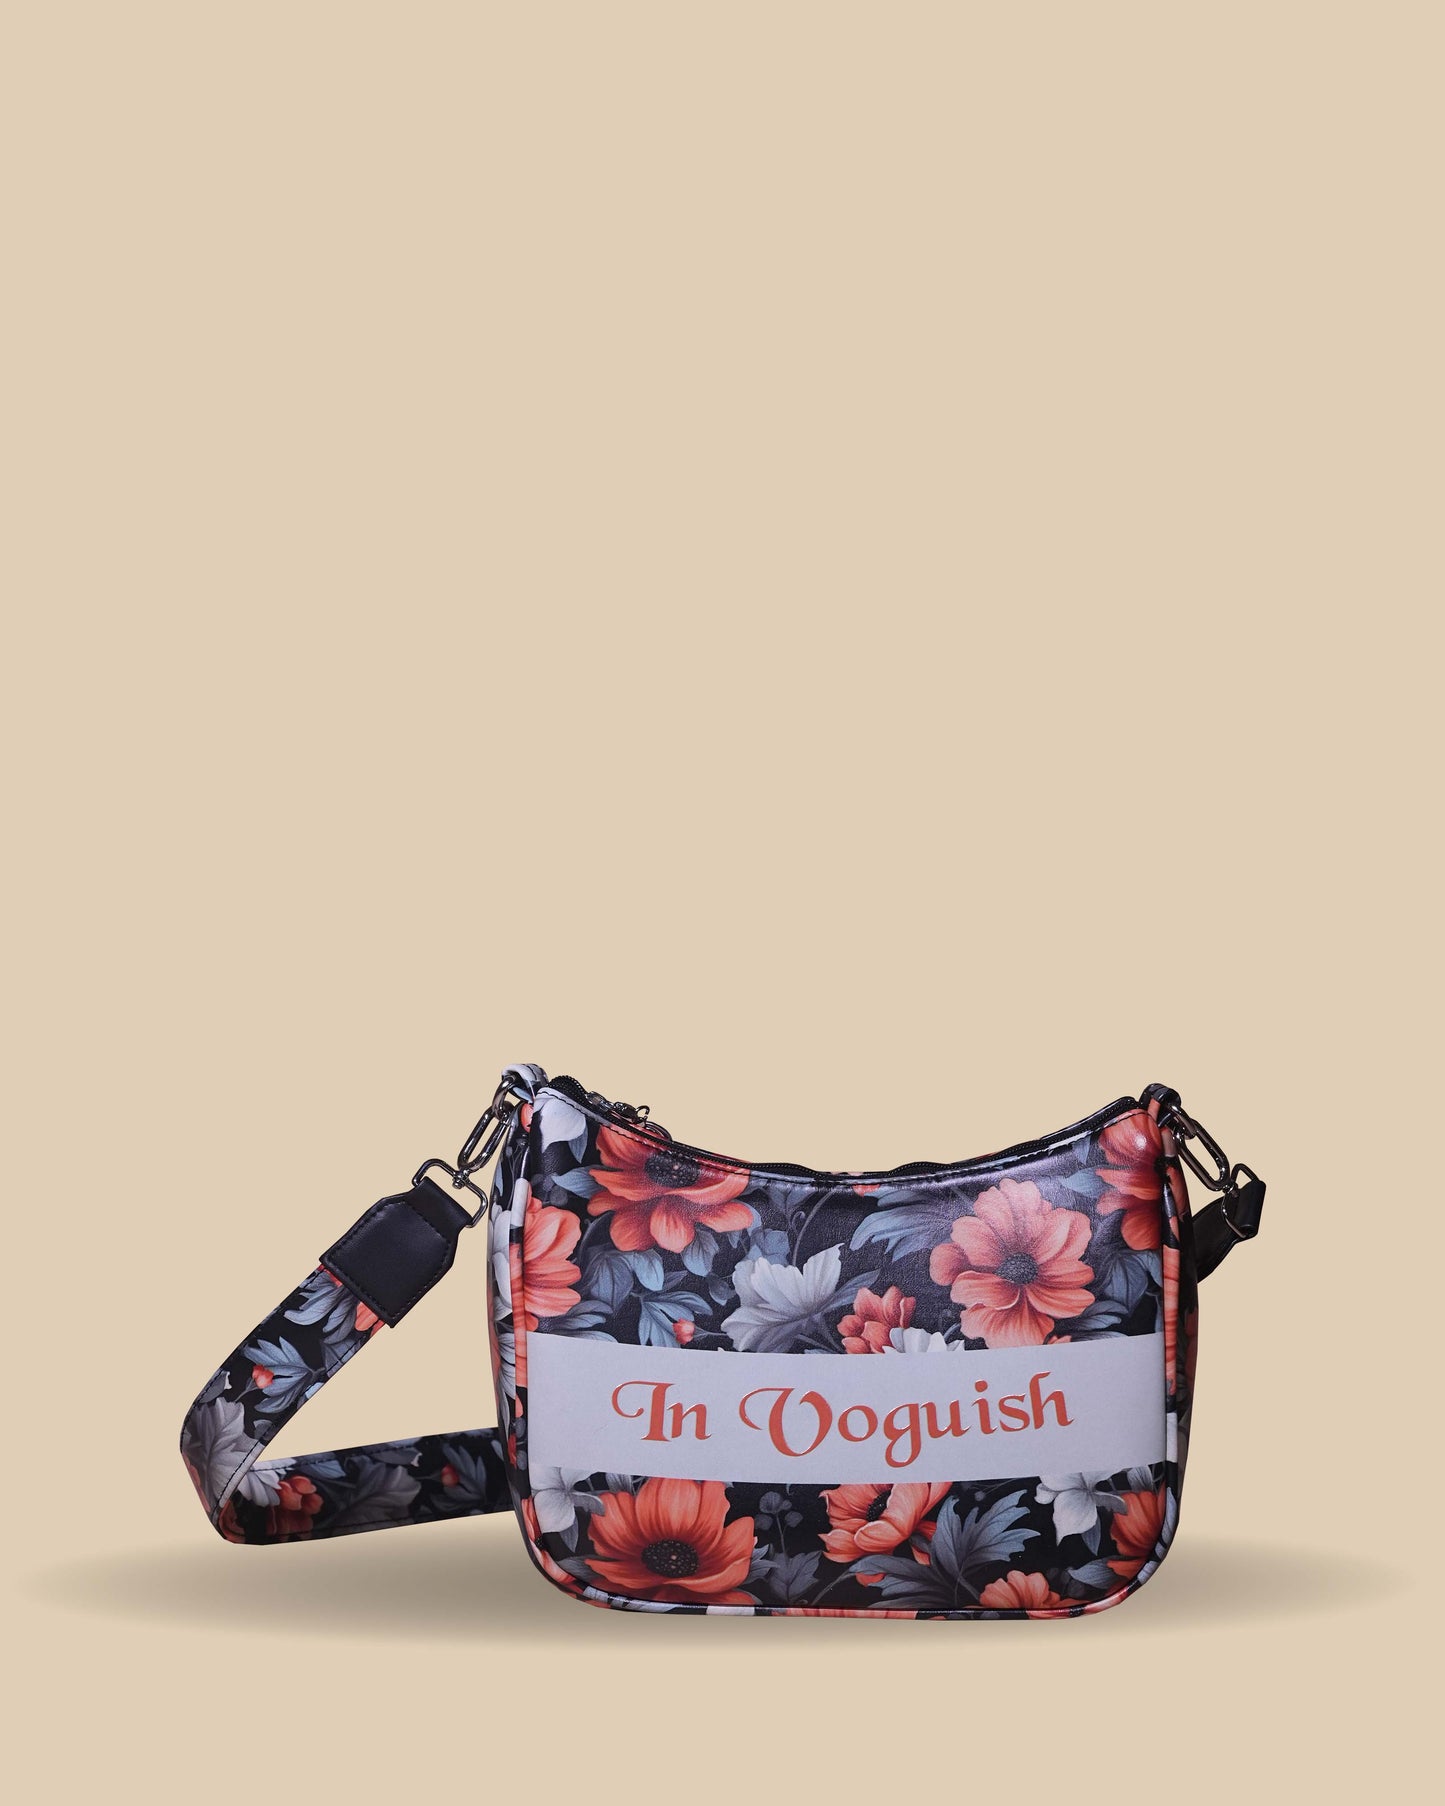 Customized Sling Bag Designed With Beautiful Flowers